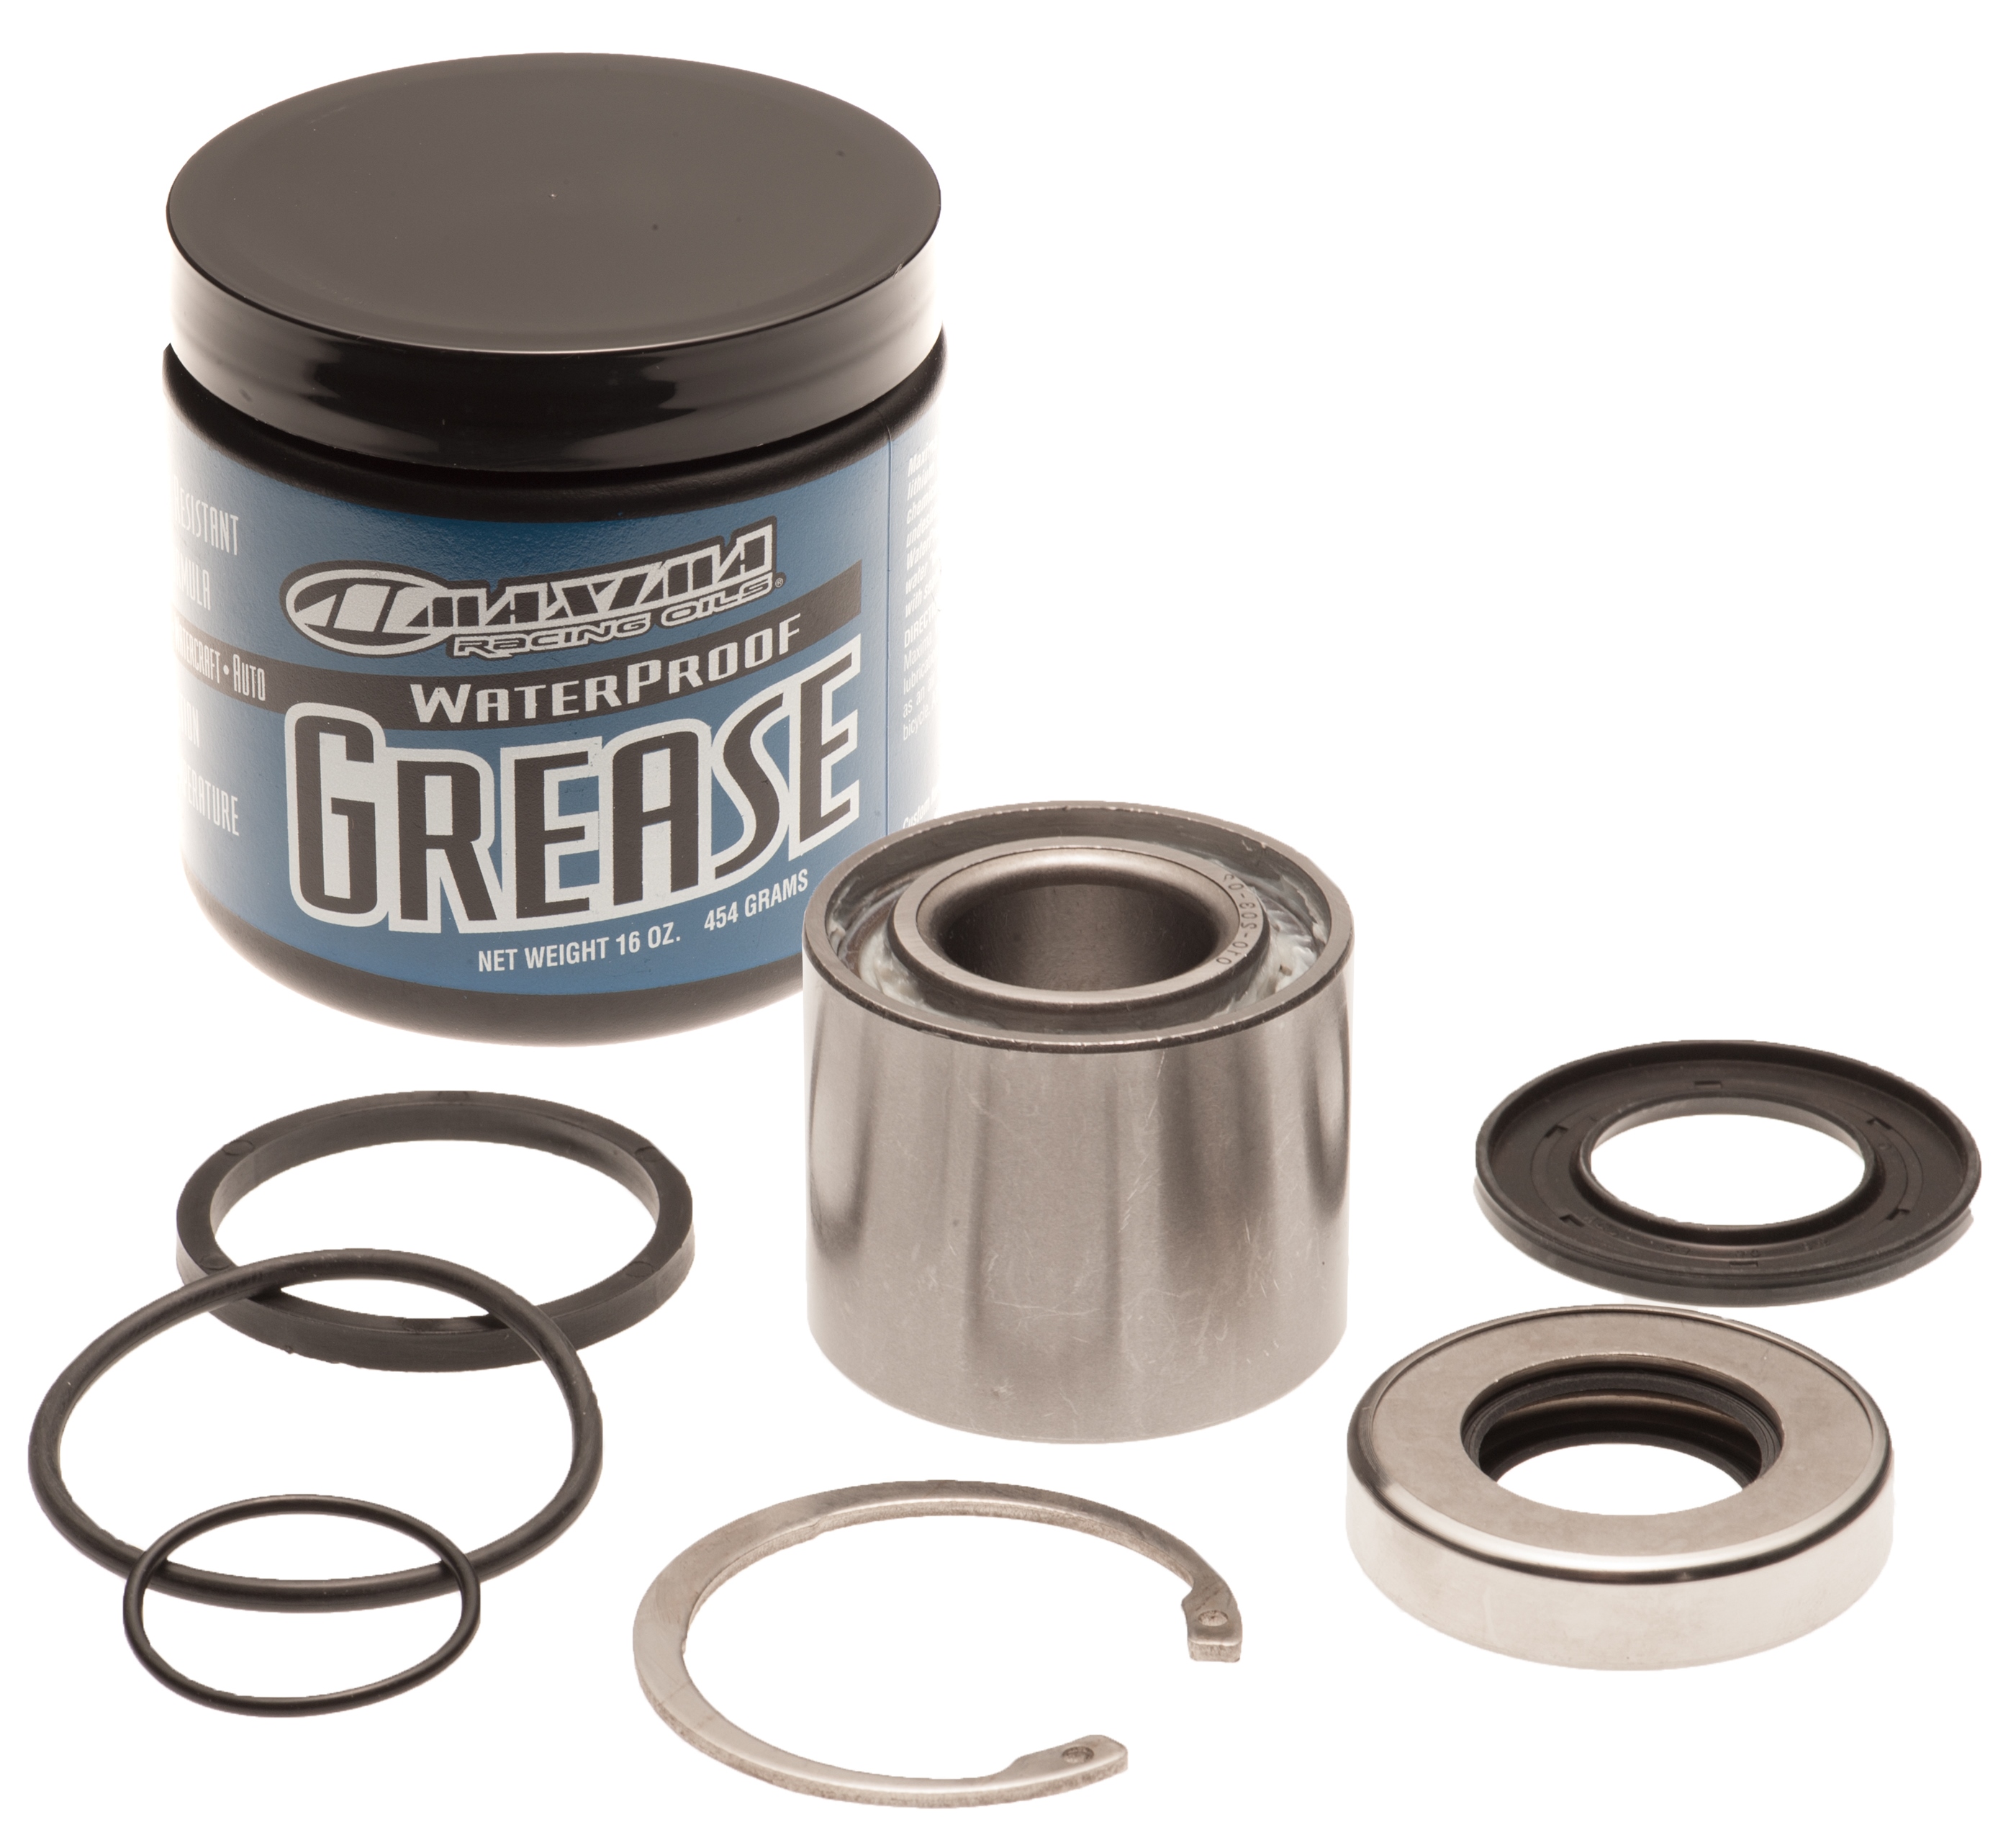 Jet Pump Rebuild Kit W/ Grease & Tool for SeaDoo Spark All Models